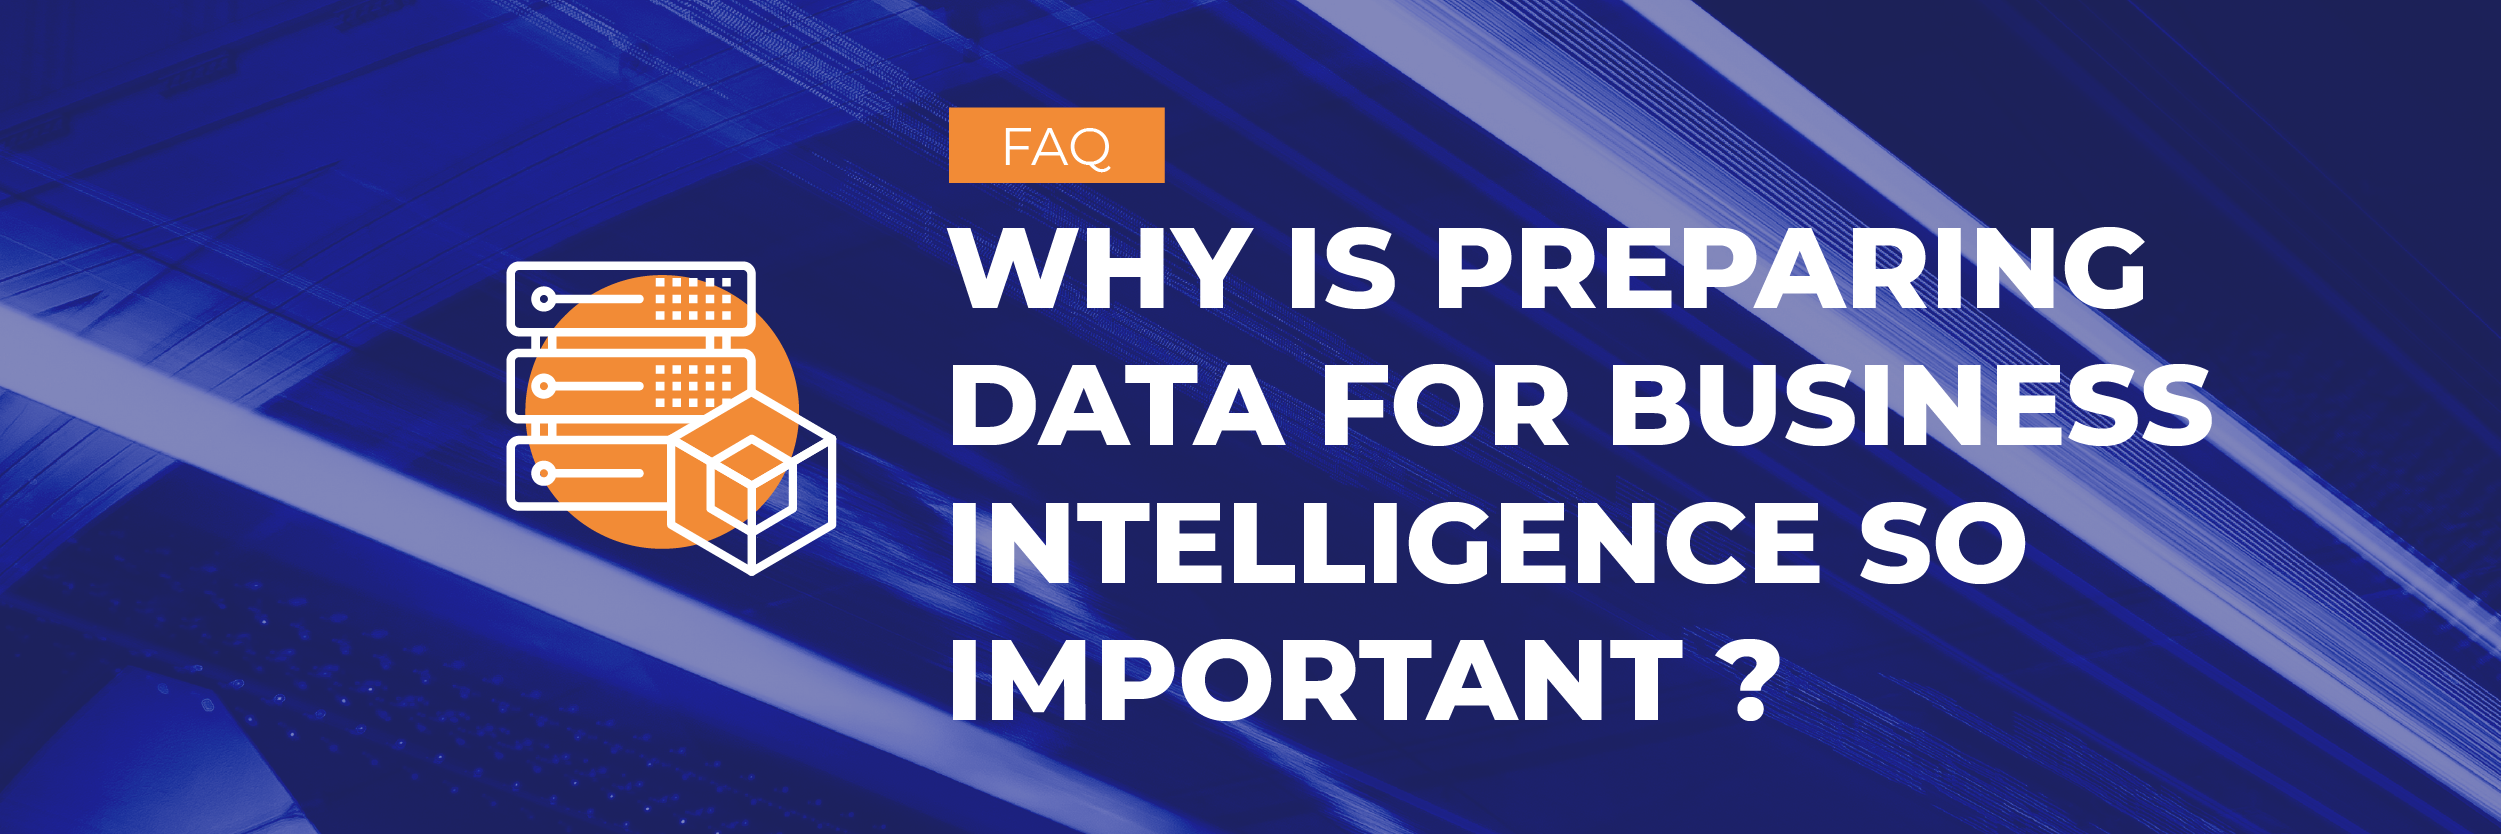 The importance of preparing data for business intelligence